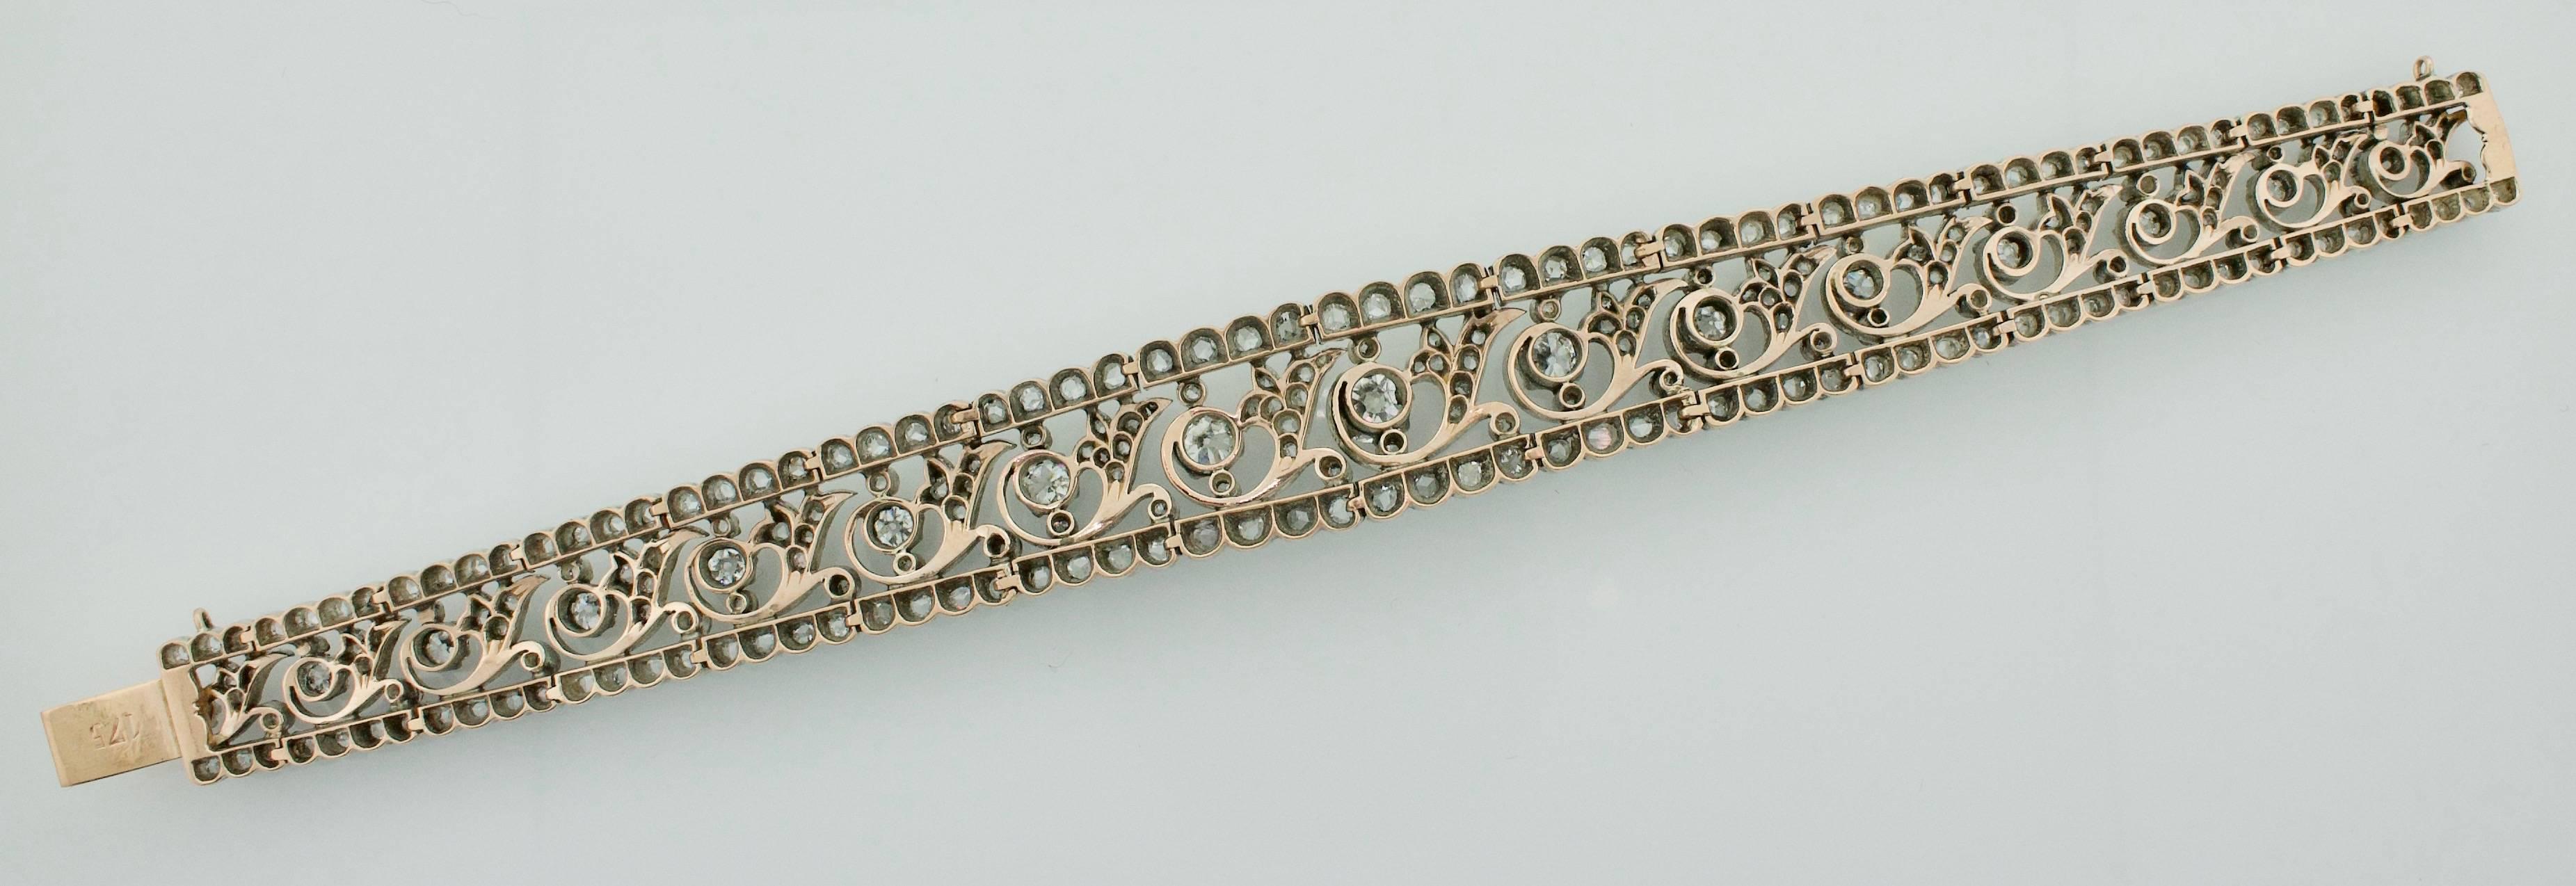 Victorian Choker-Bracelet Combination Convertible 18 Karat Gold and Silver For Sale 3